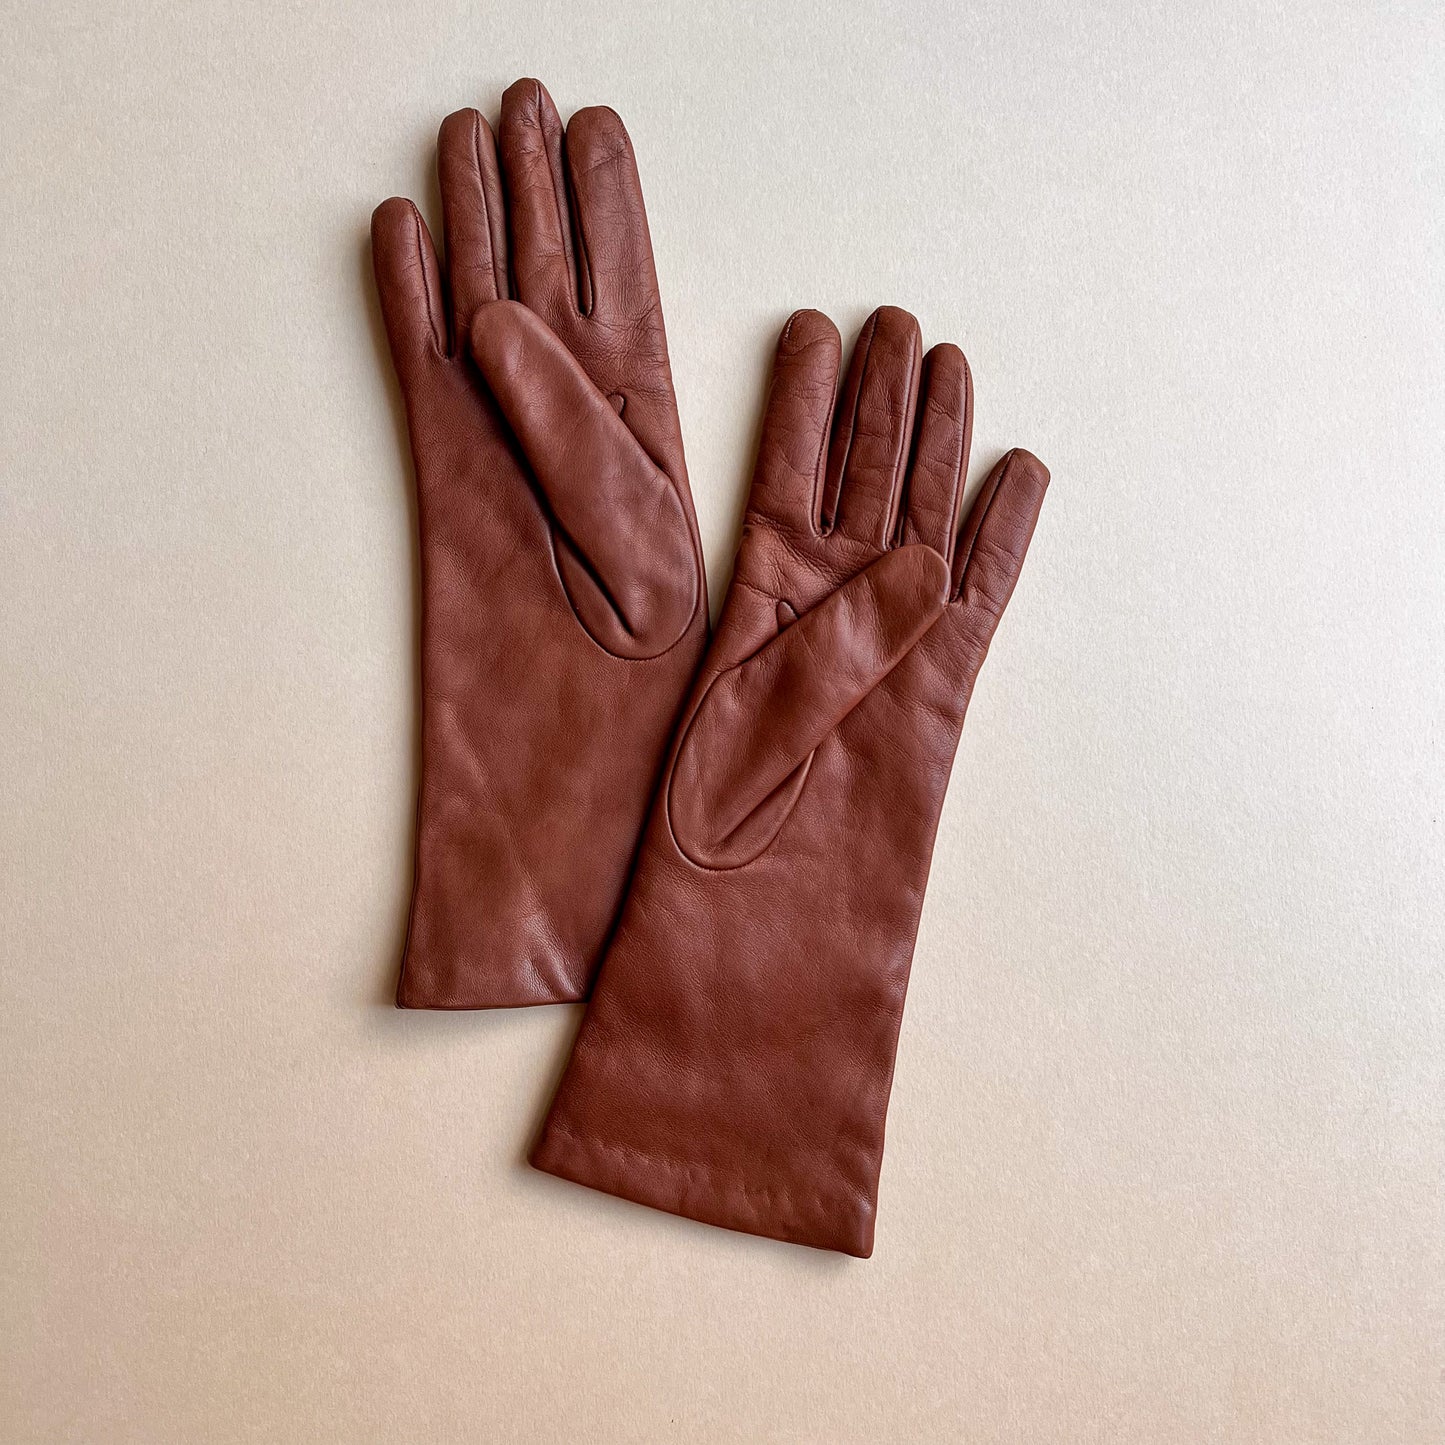 1980s Super Soft Brown Leather Gloves (7)